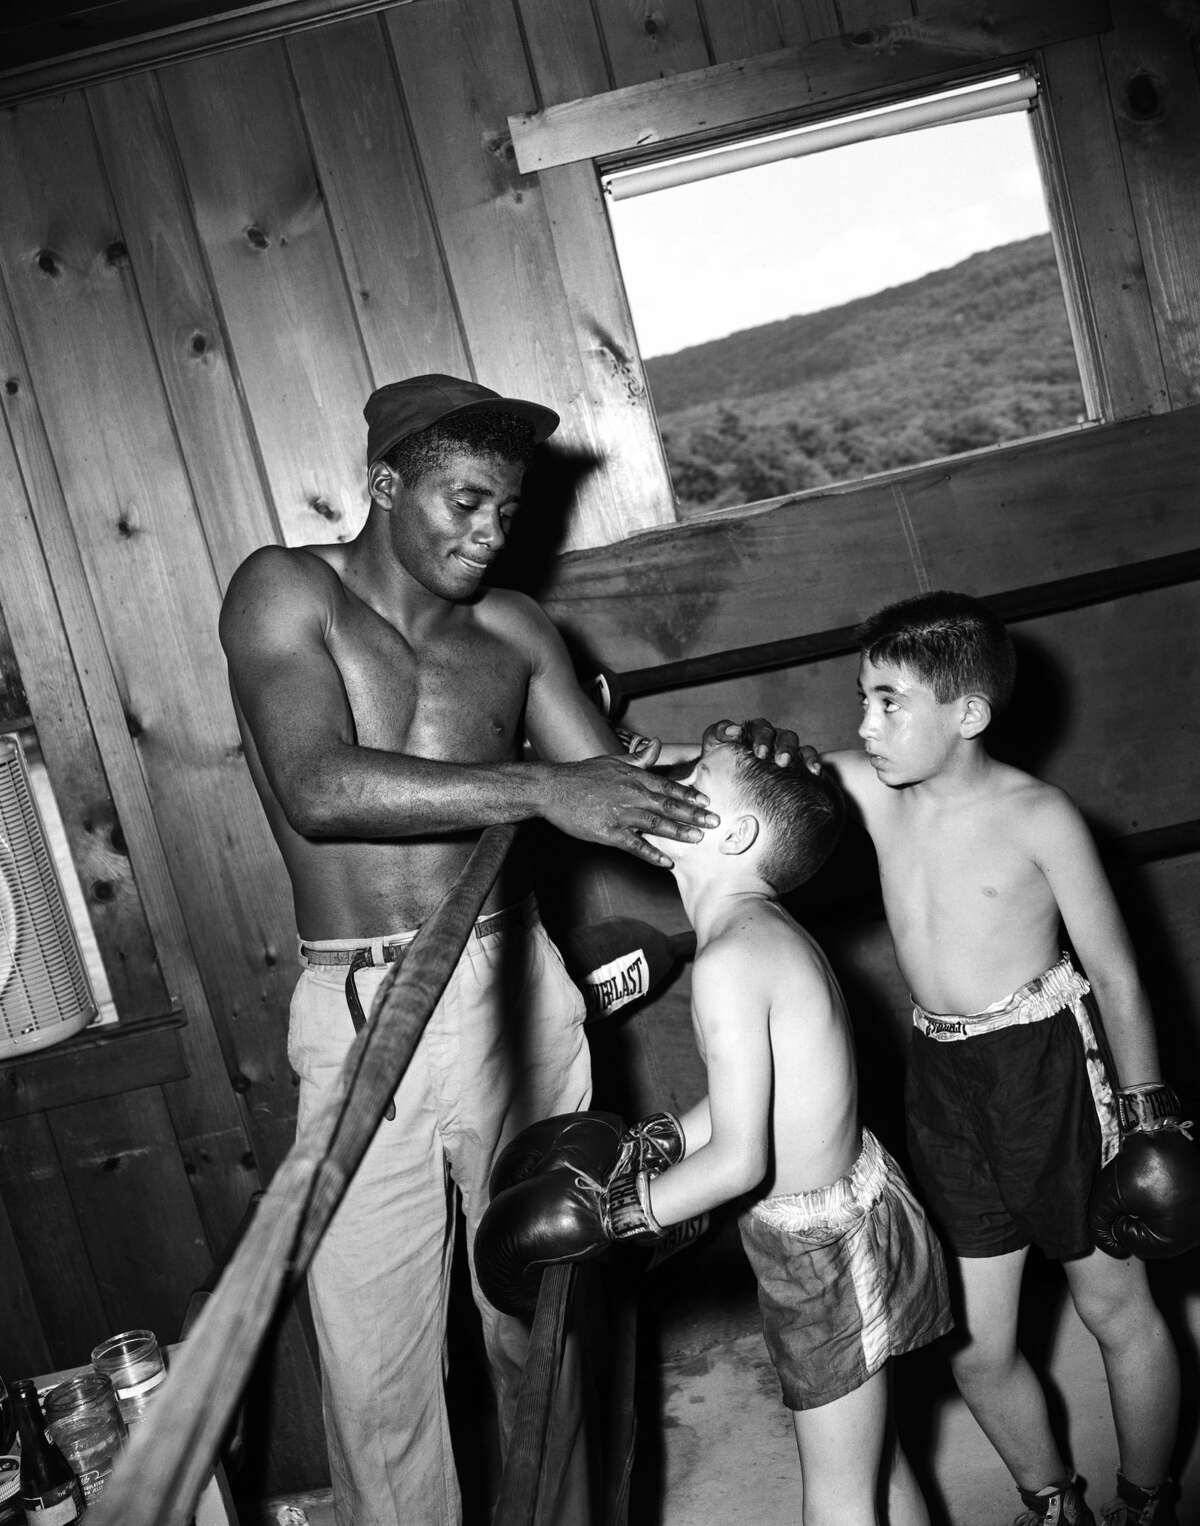 Fighter Floyd Patterson, who trained under Cus D'Amato, takes time out to coach a couple of young boys at Patterson's training camp on May 12, 1956 at Greenwood Lake, in Orange County. Patterson at age 21 became the youngest heavyweight champ at the time - Mike Tyson would achieve the milestone at age 20.